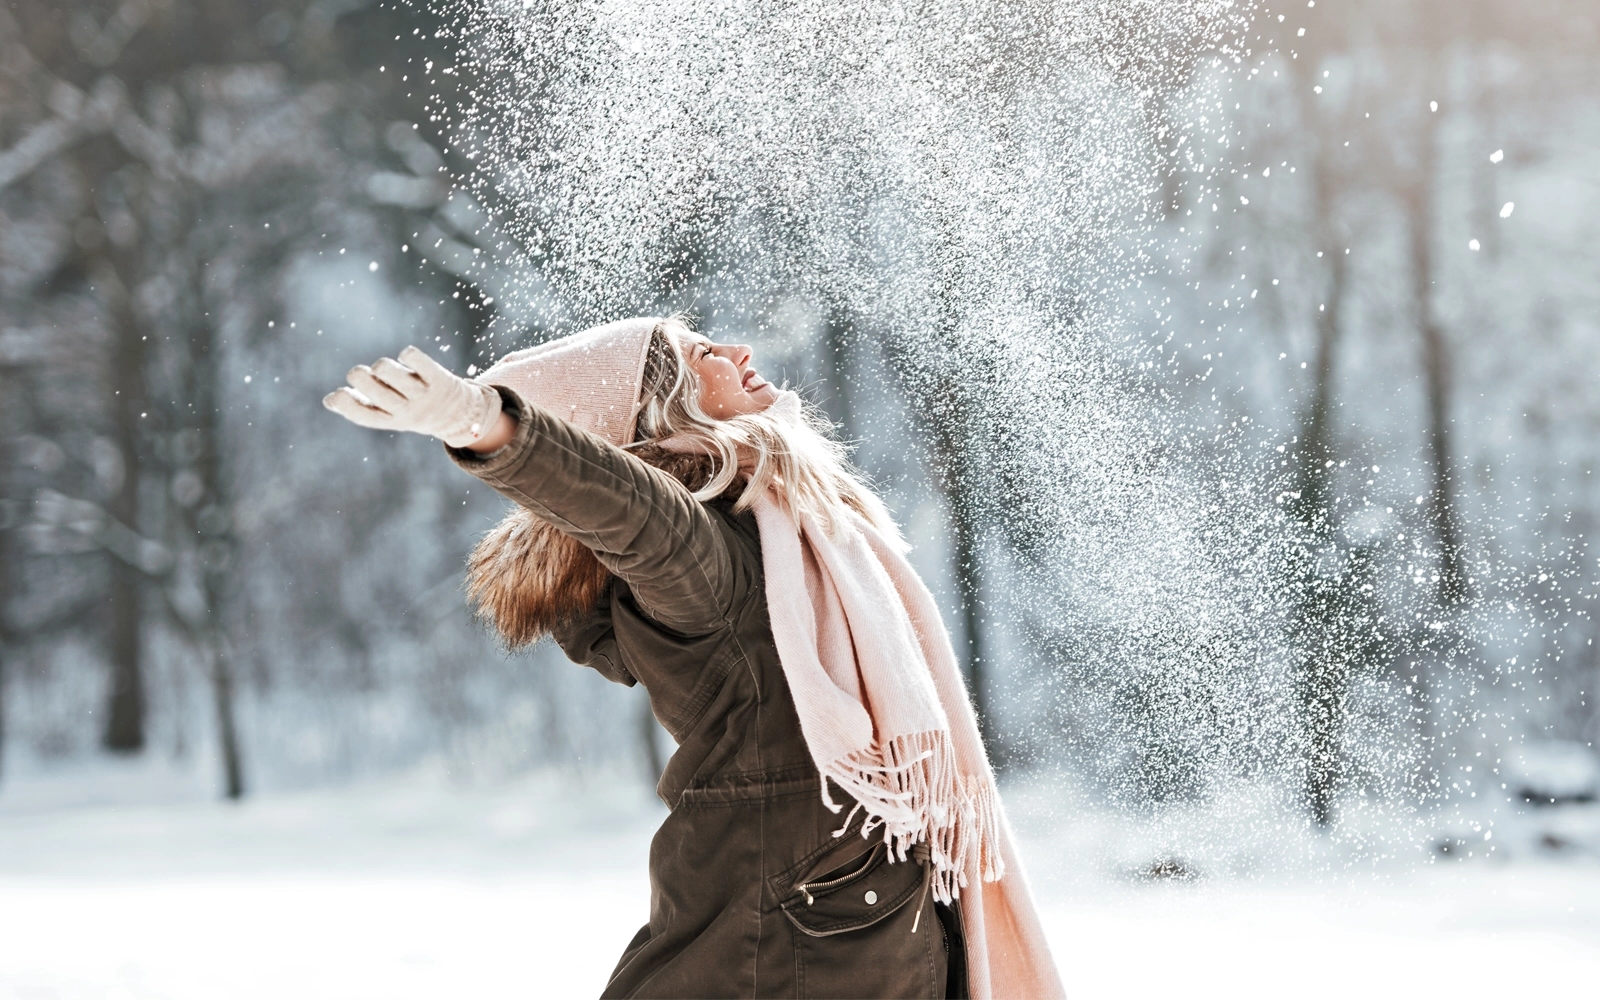 woman-playing in snow-1600x1000.webp